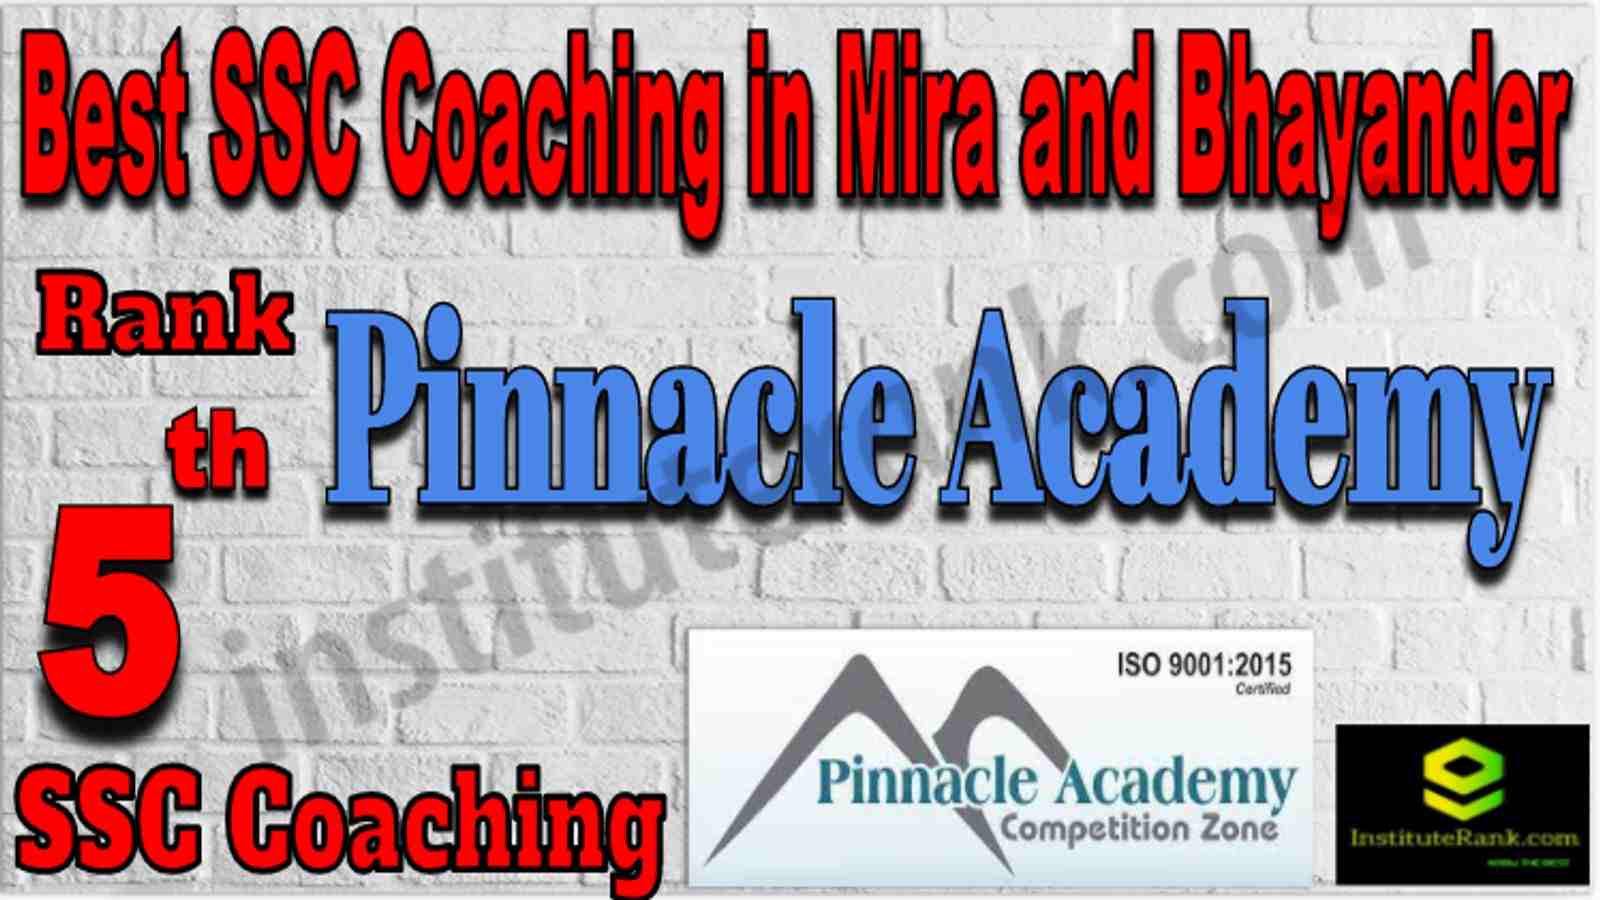 5th Best SSC Coaching in mira and bhayander